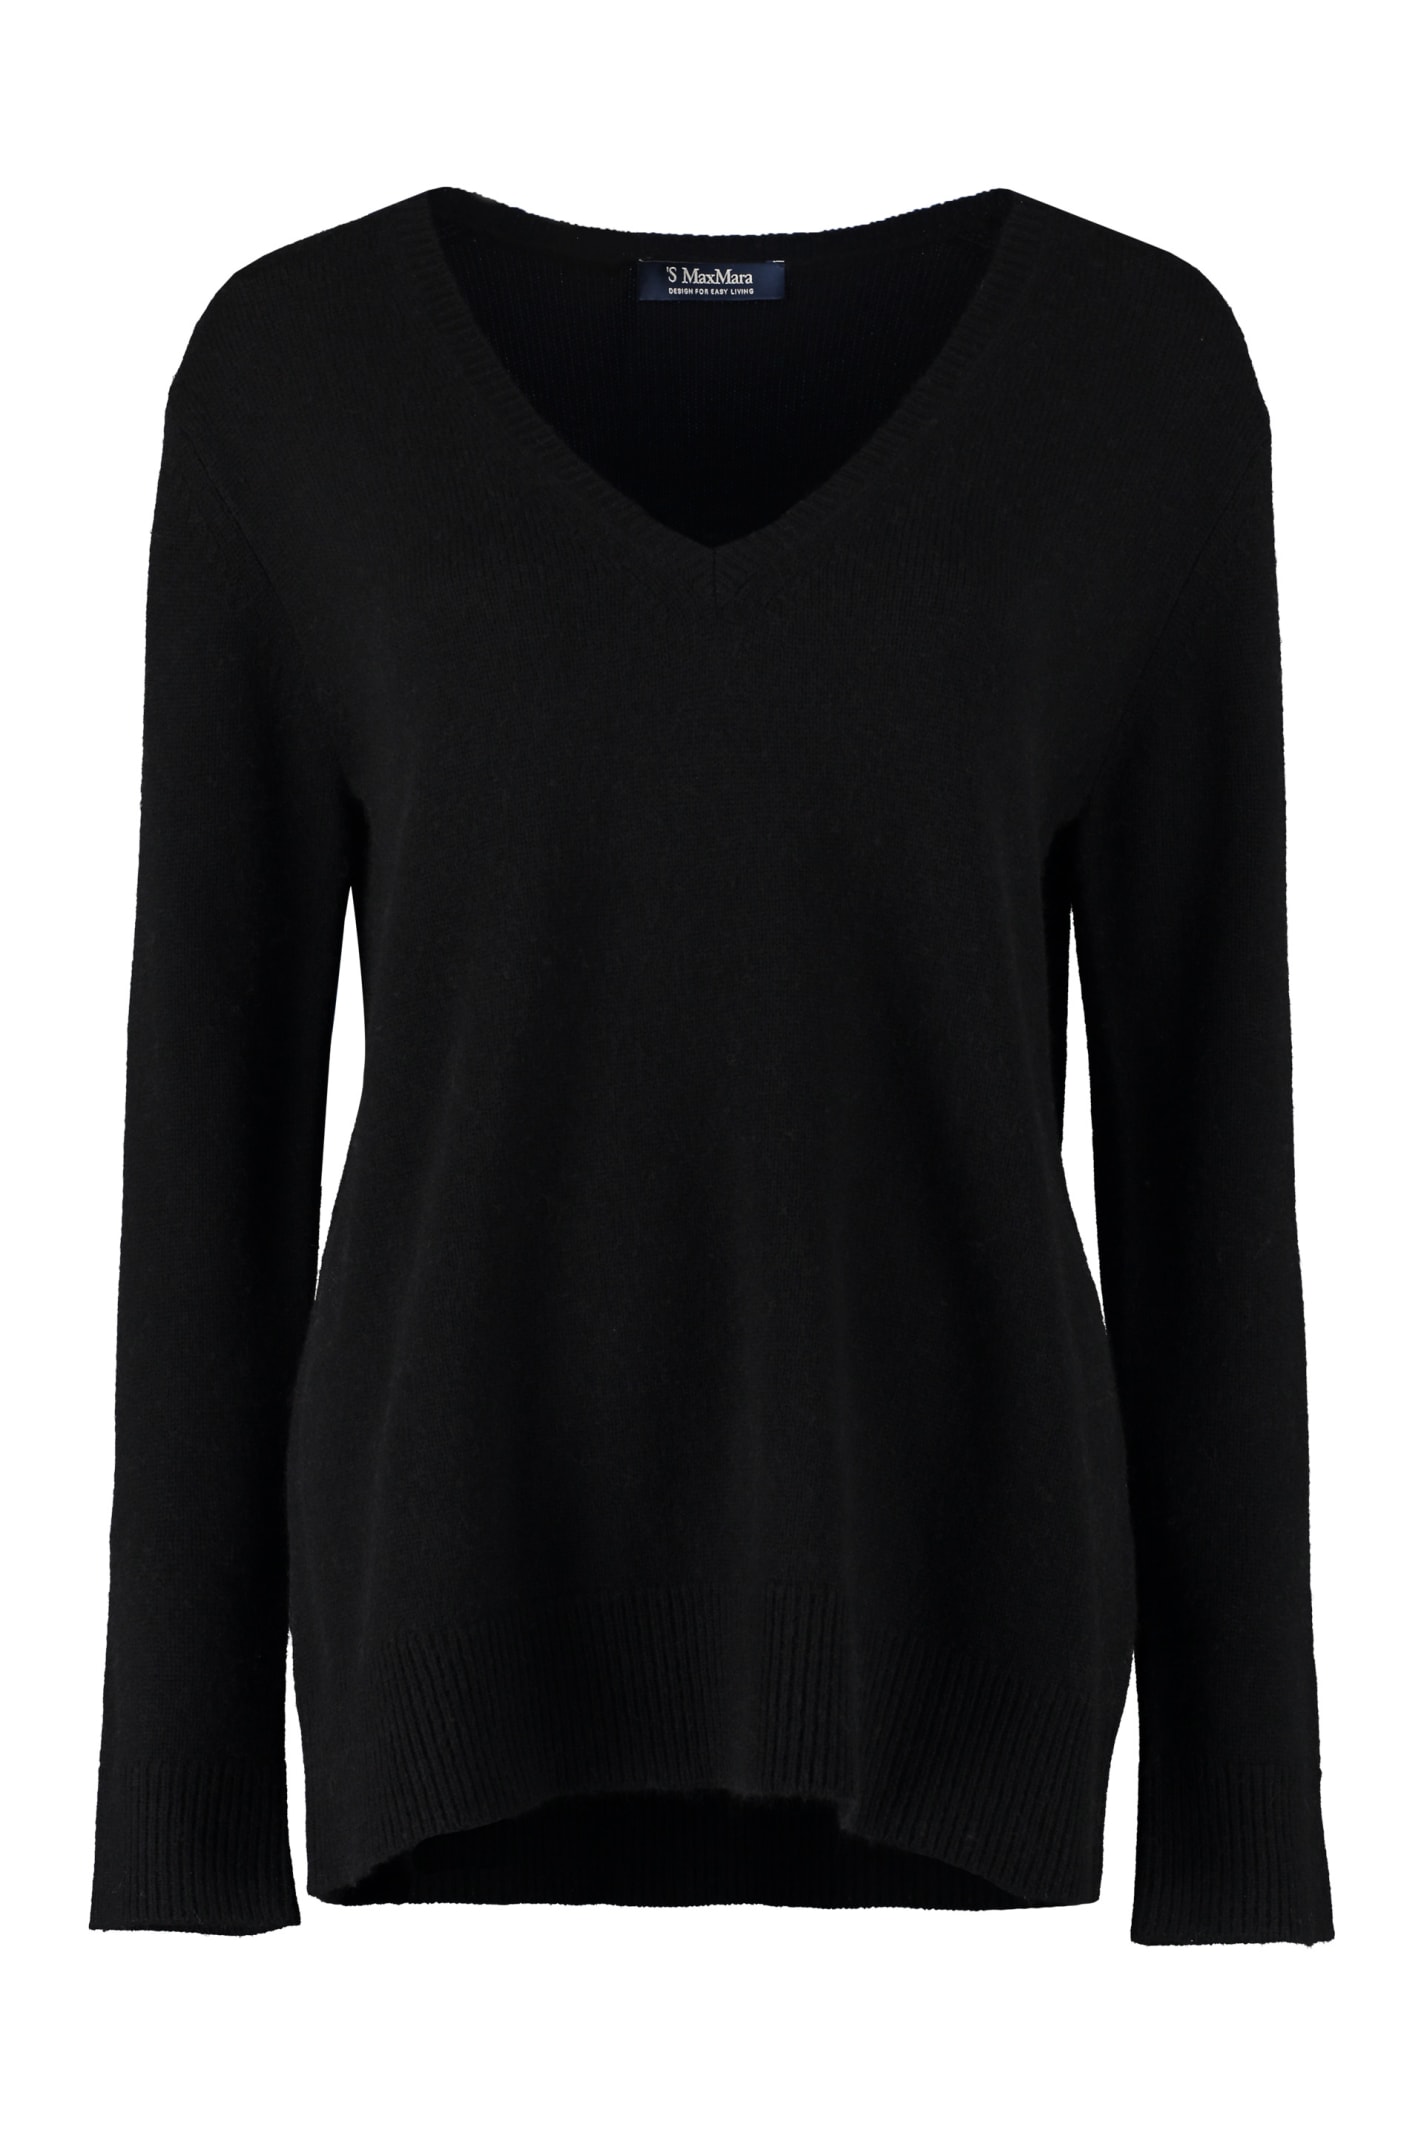 'S MAX MARA VERONA WOOL AND CASHMERE PULLOVER